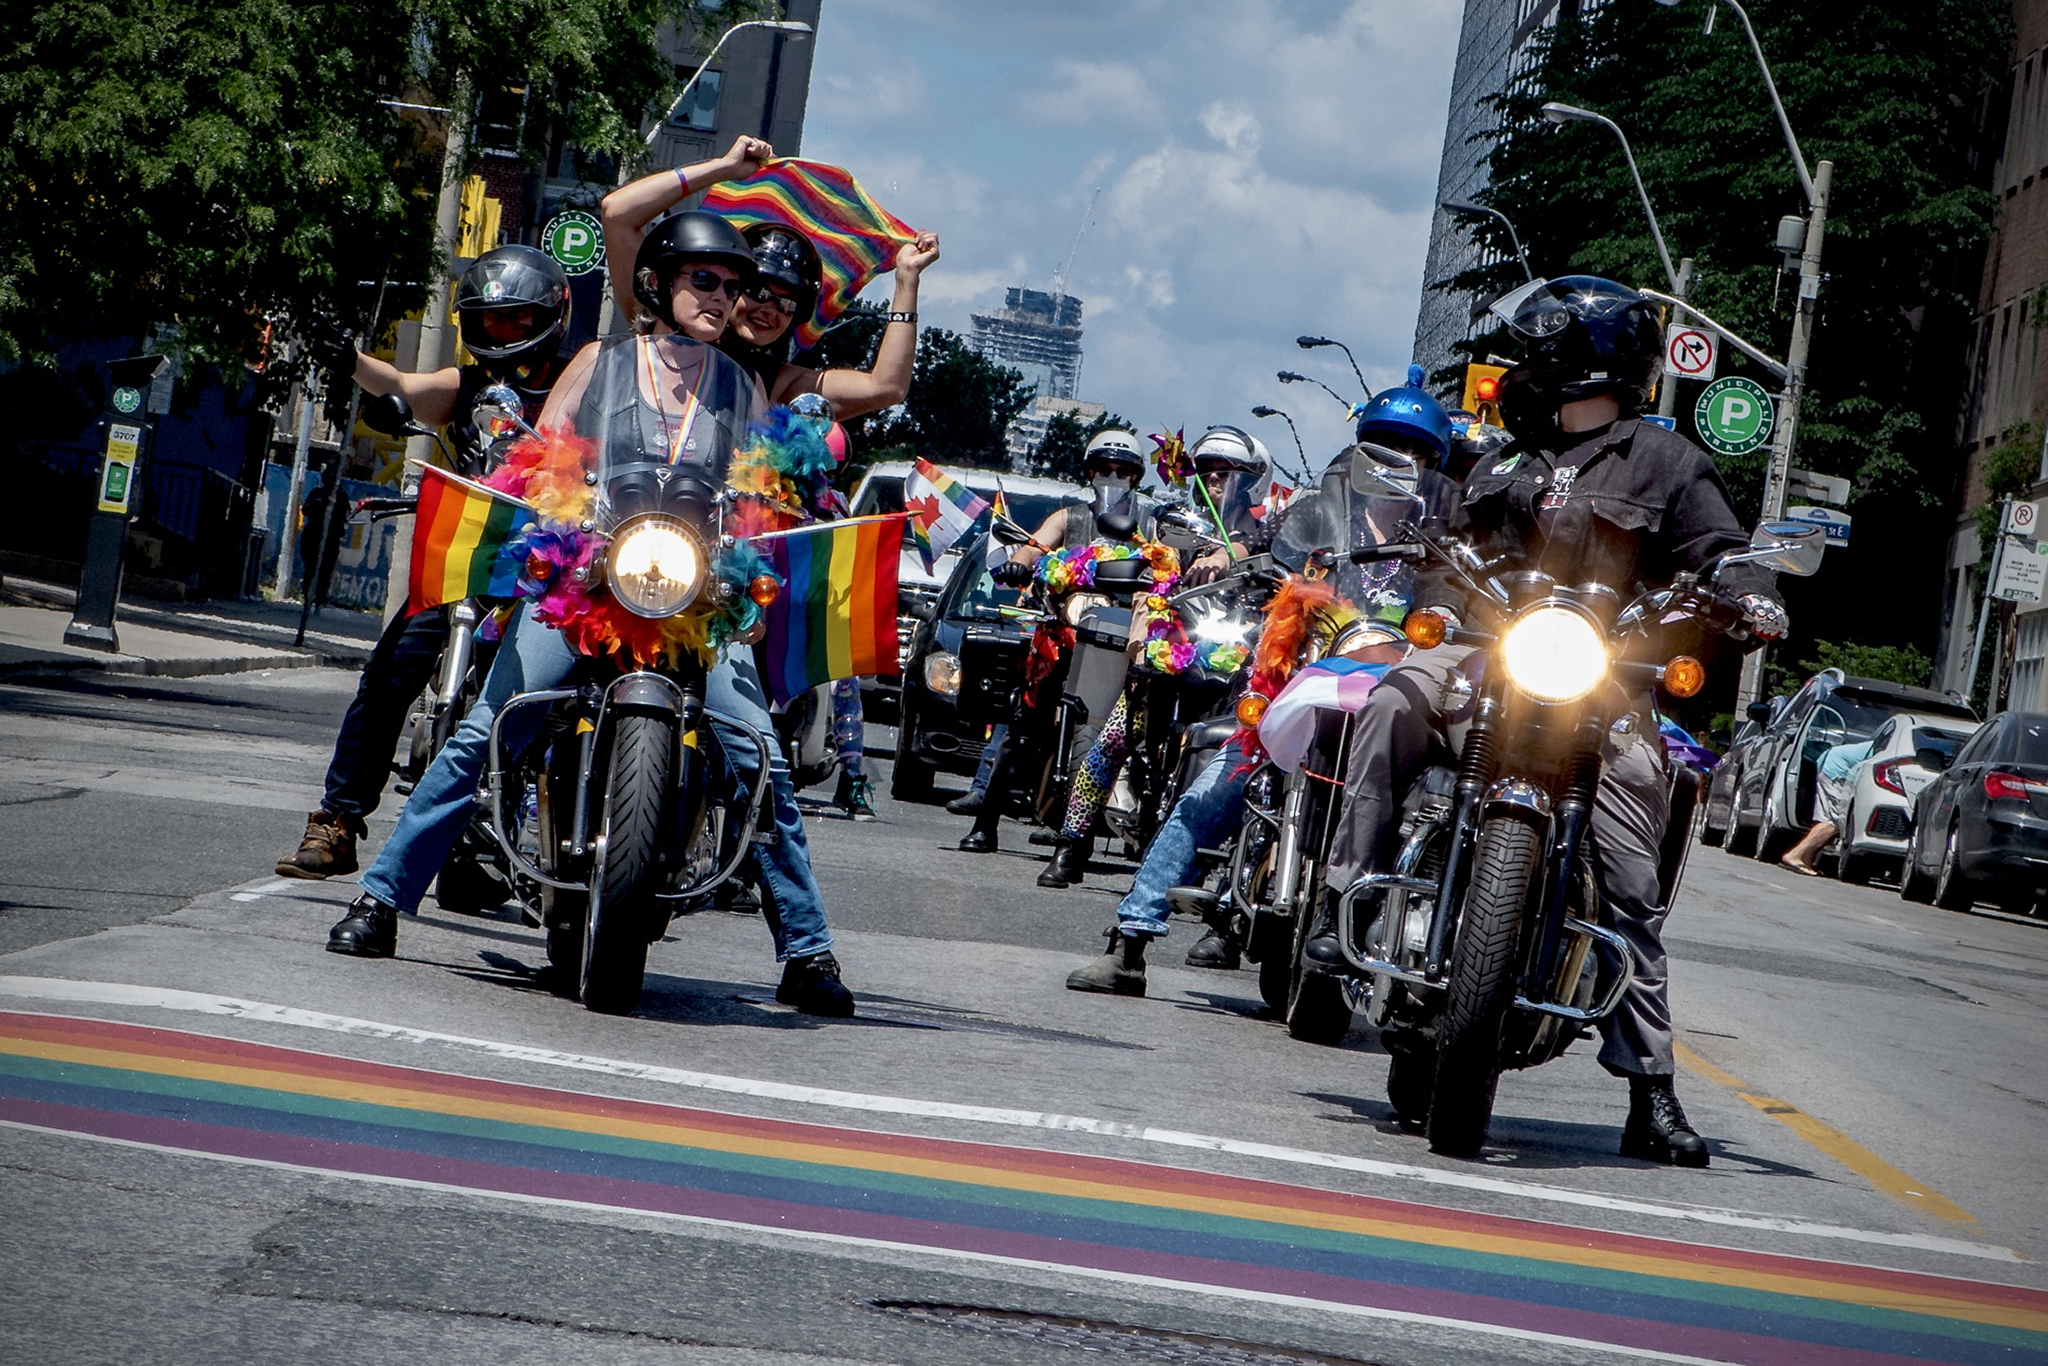 The Amazons motorcycle group in a 2020 Pride parade; two lines of motorcycles and riders, decorated with rainbow flags, riding down a city street